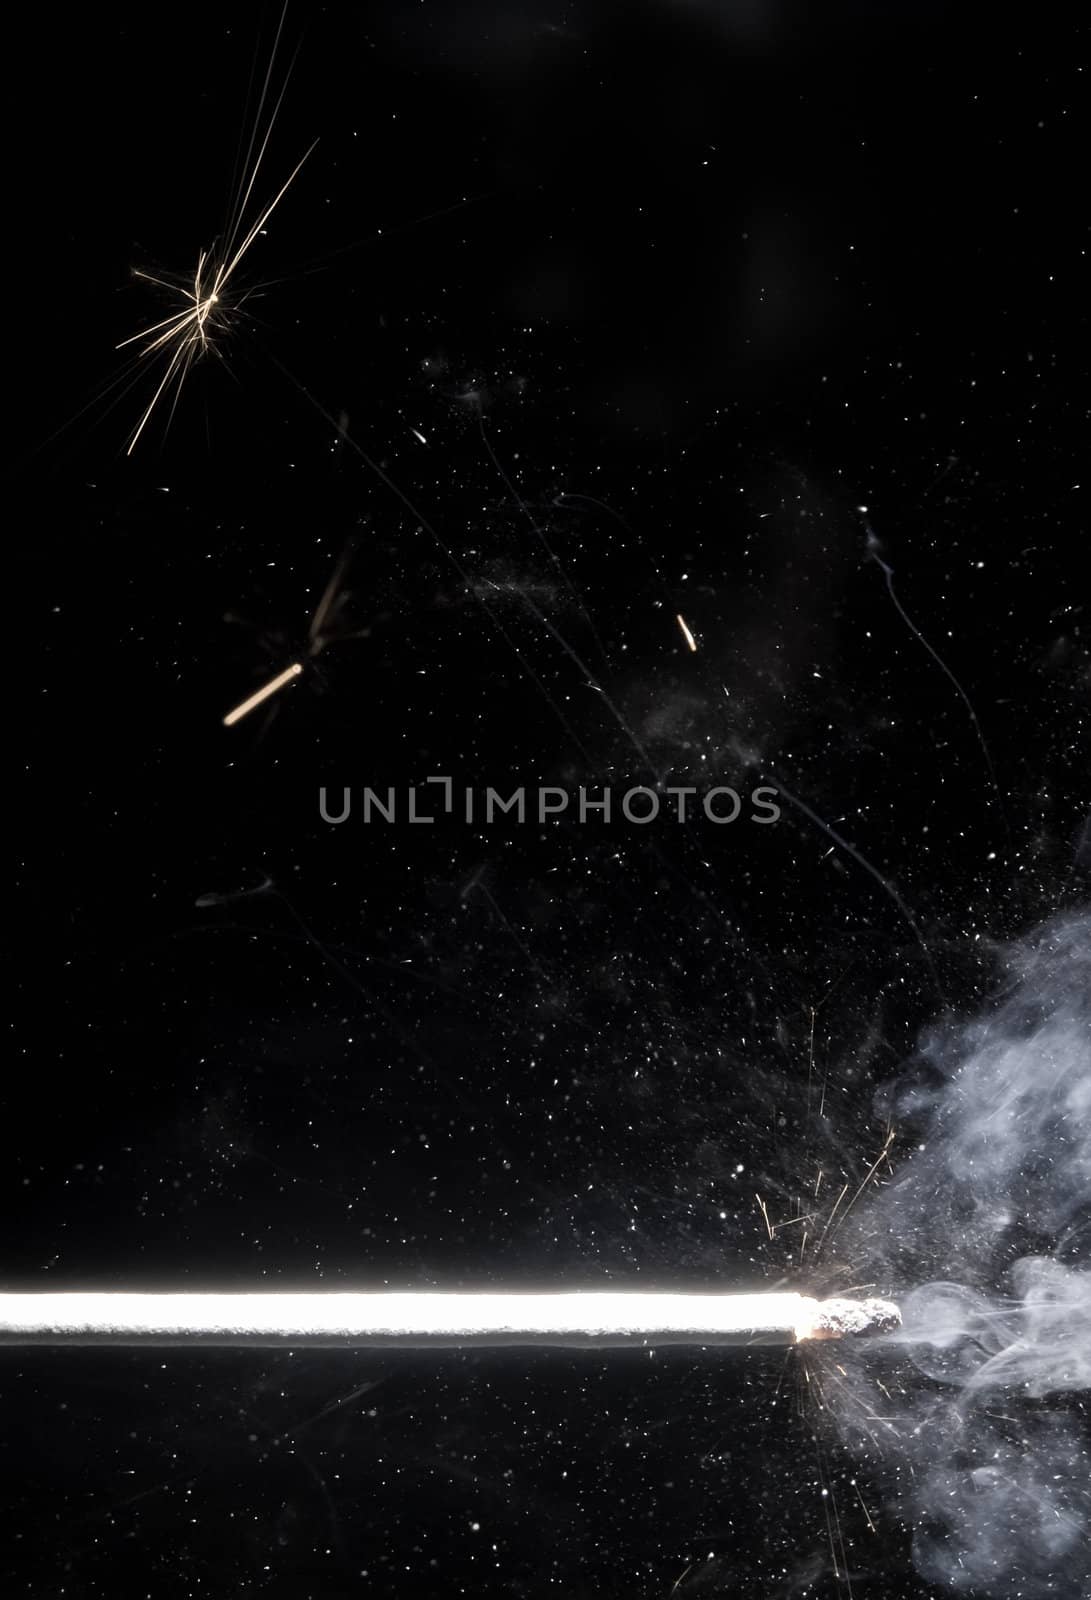 Detail image of a pyrotechnic fuse burning up